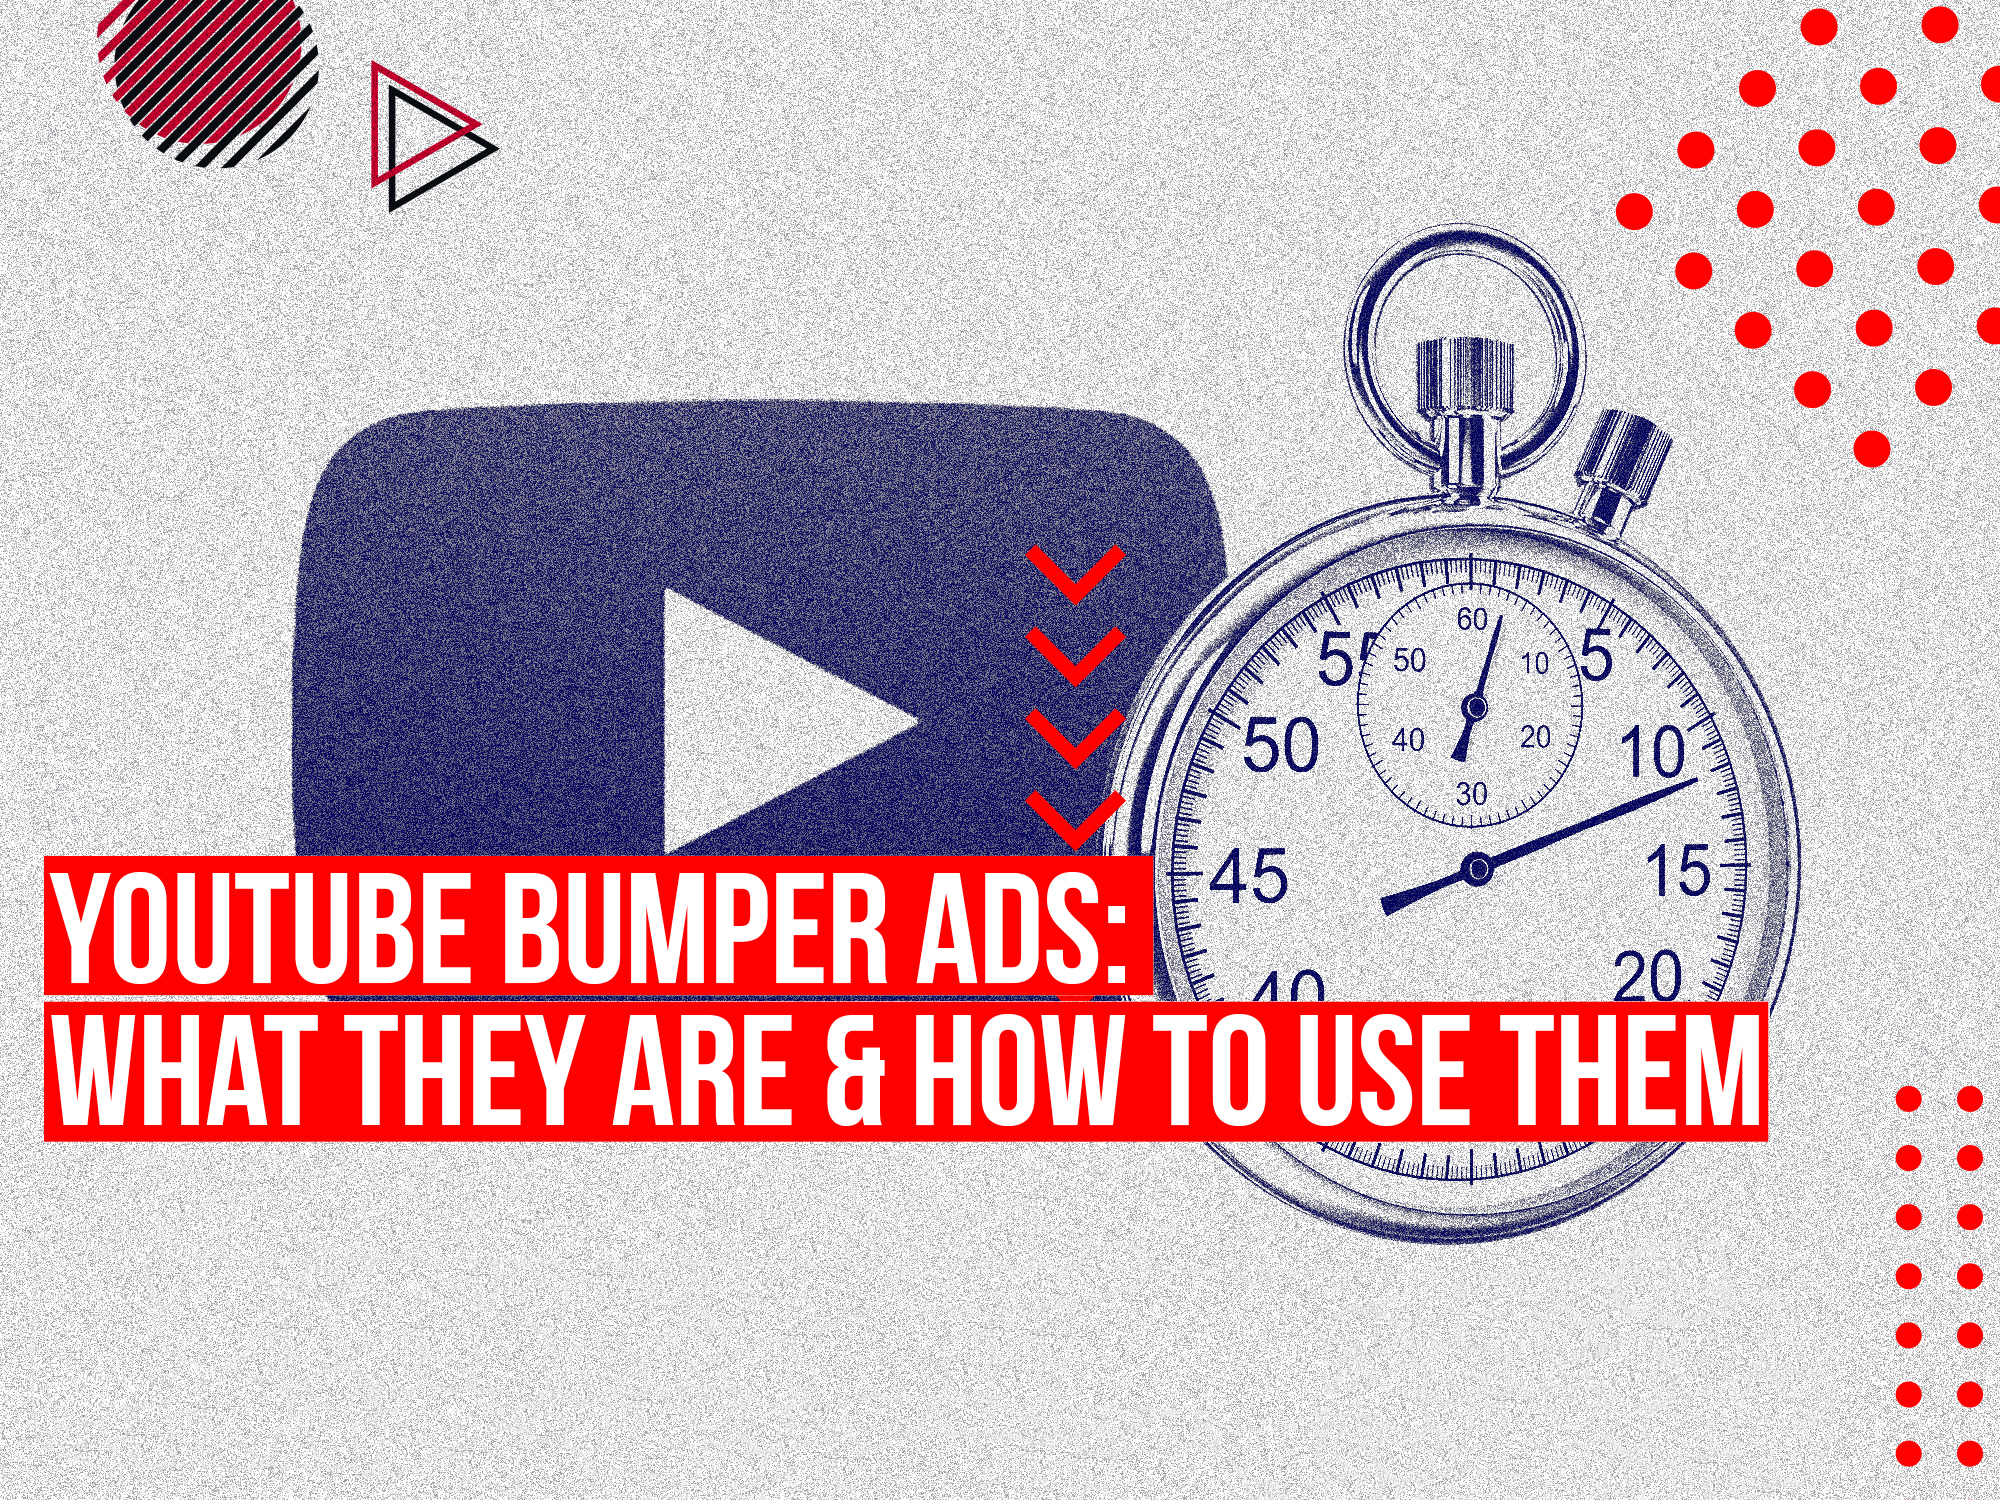 YouTube Bumper Ads: What They Are & How to Use Them